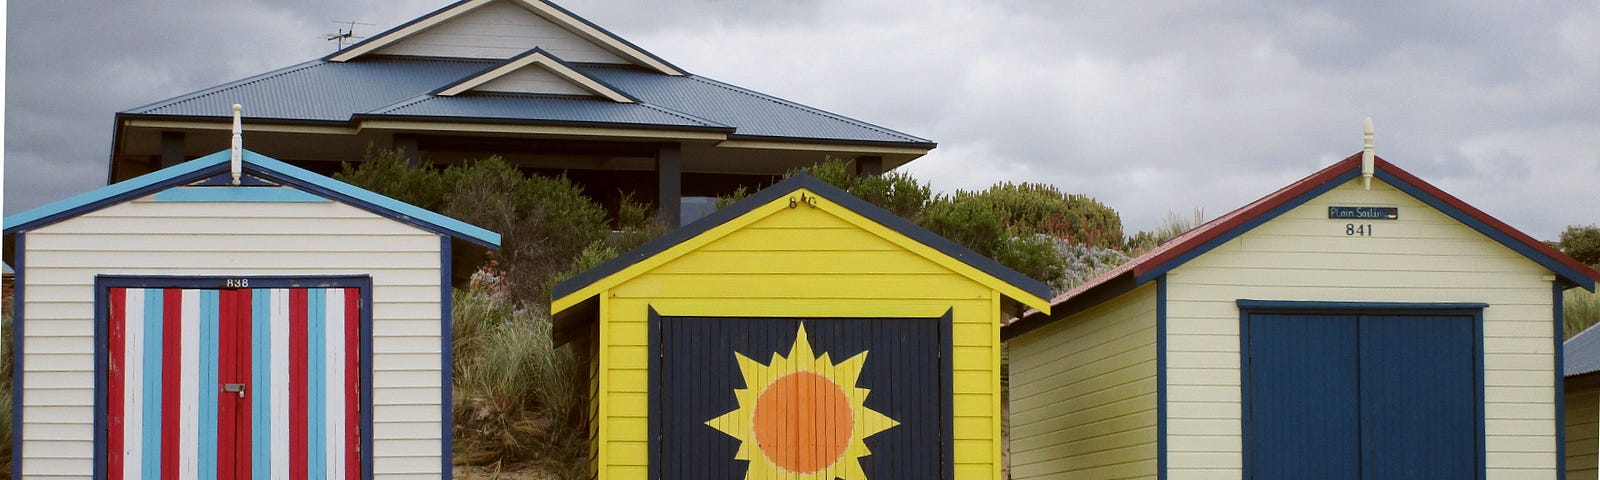 Three colorful bathing boxes on the beach with the roof line of a house and grey clouds in the background.